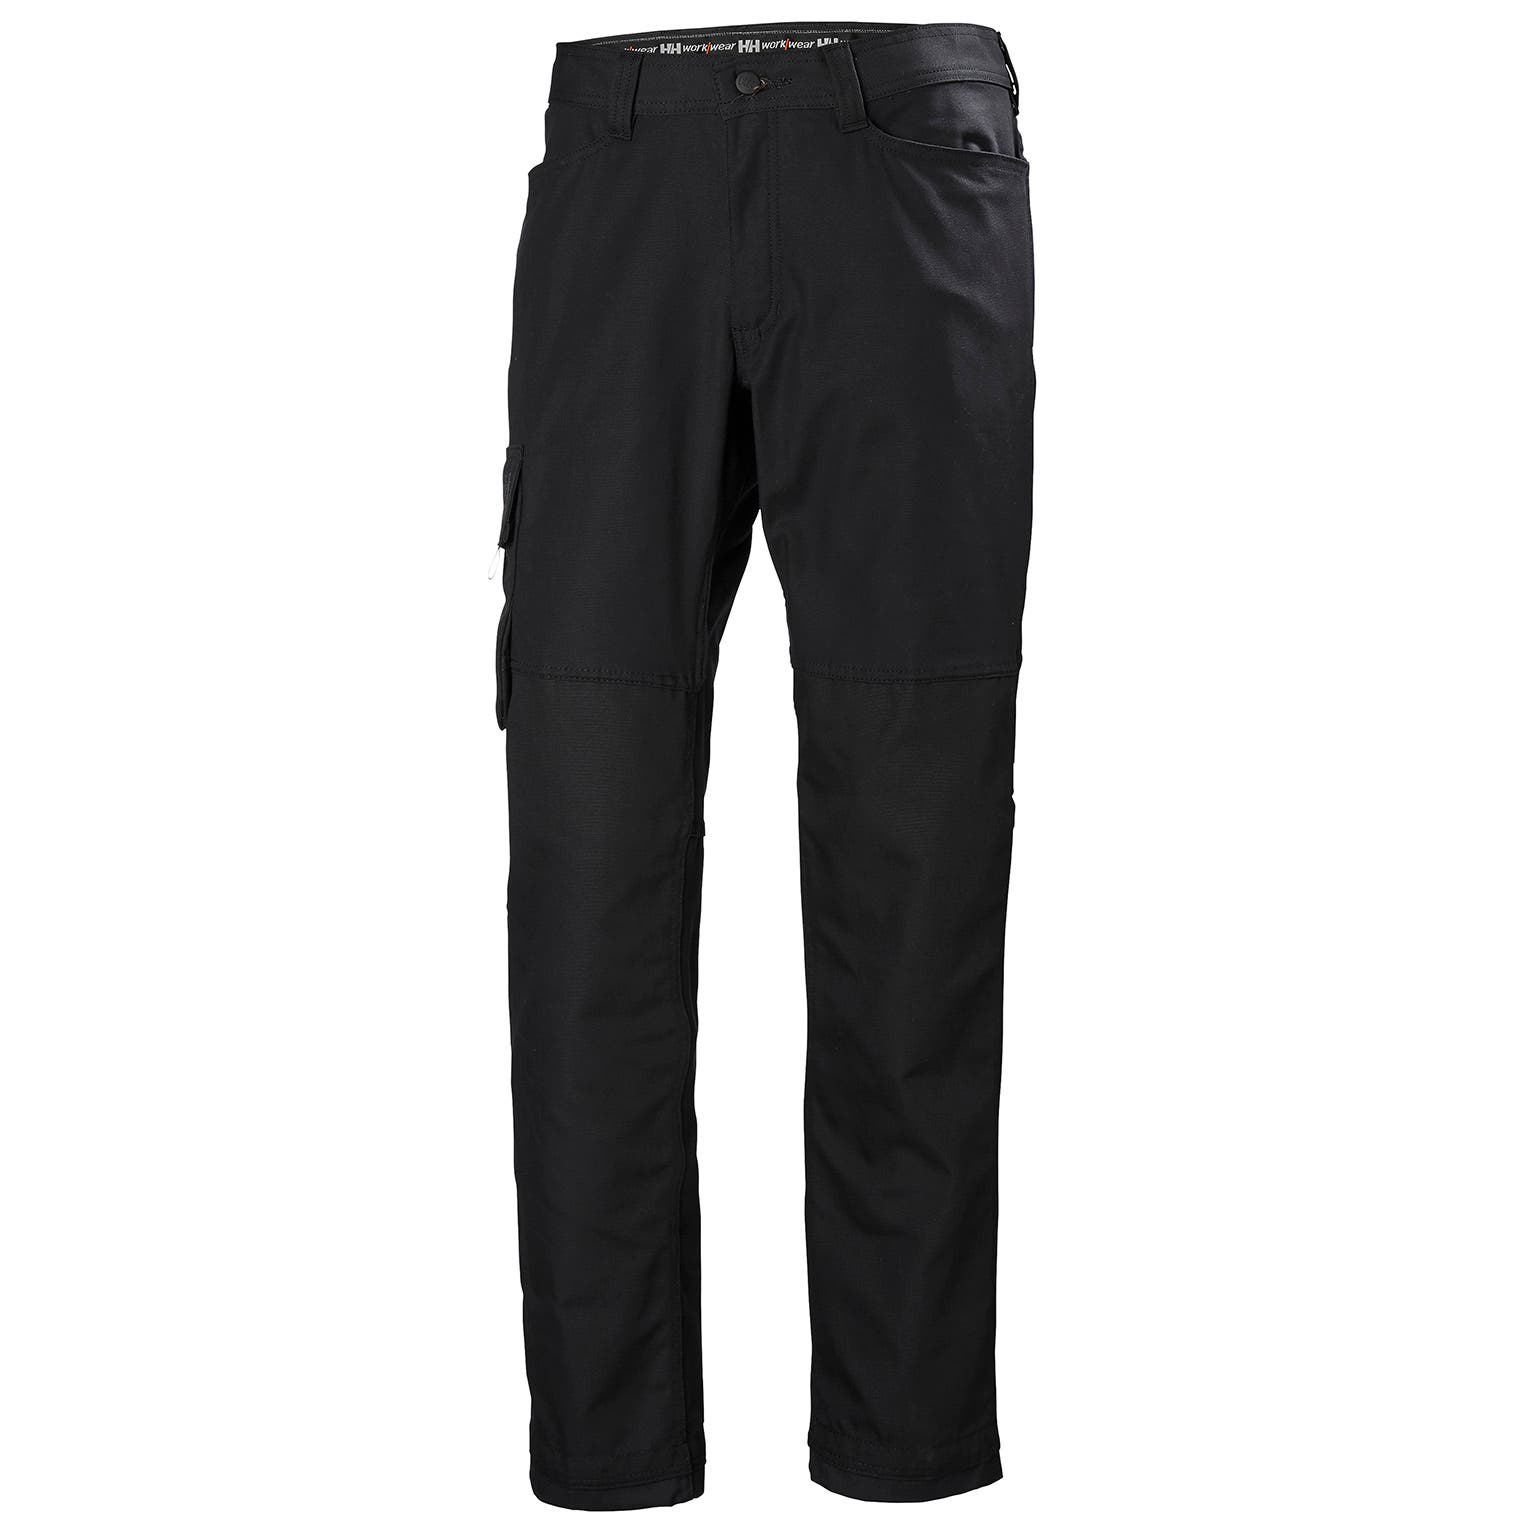 Helly Hansen Men's Oxford Service Na Pant in Black from the front